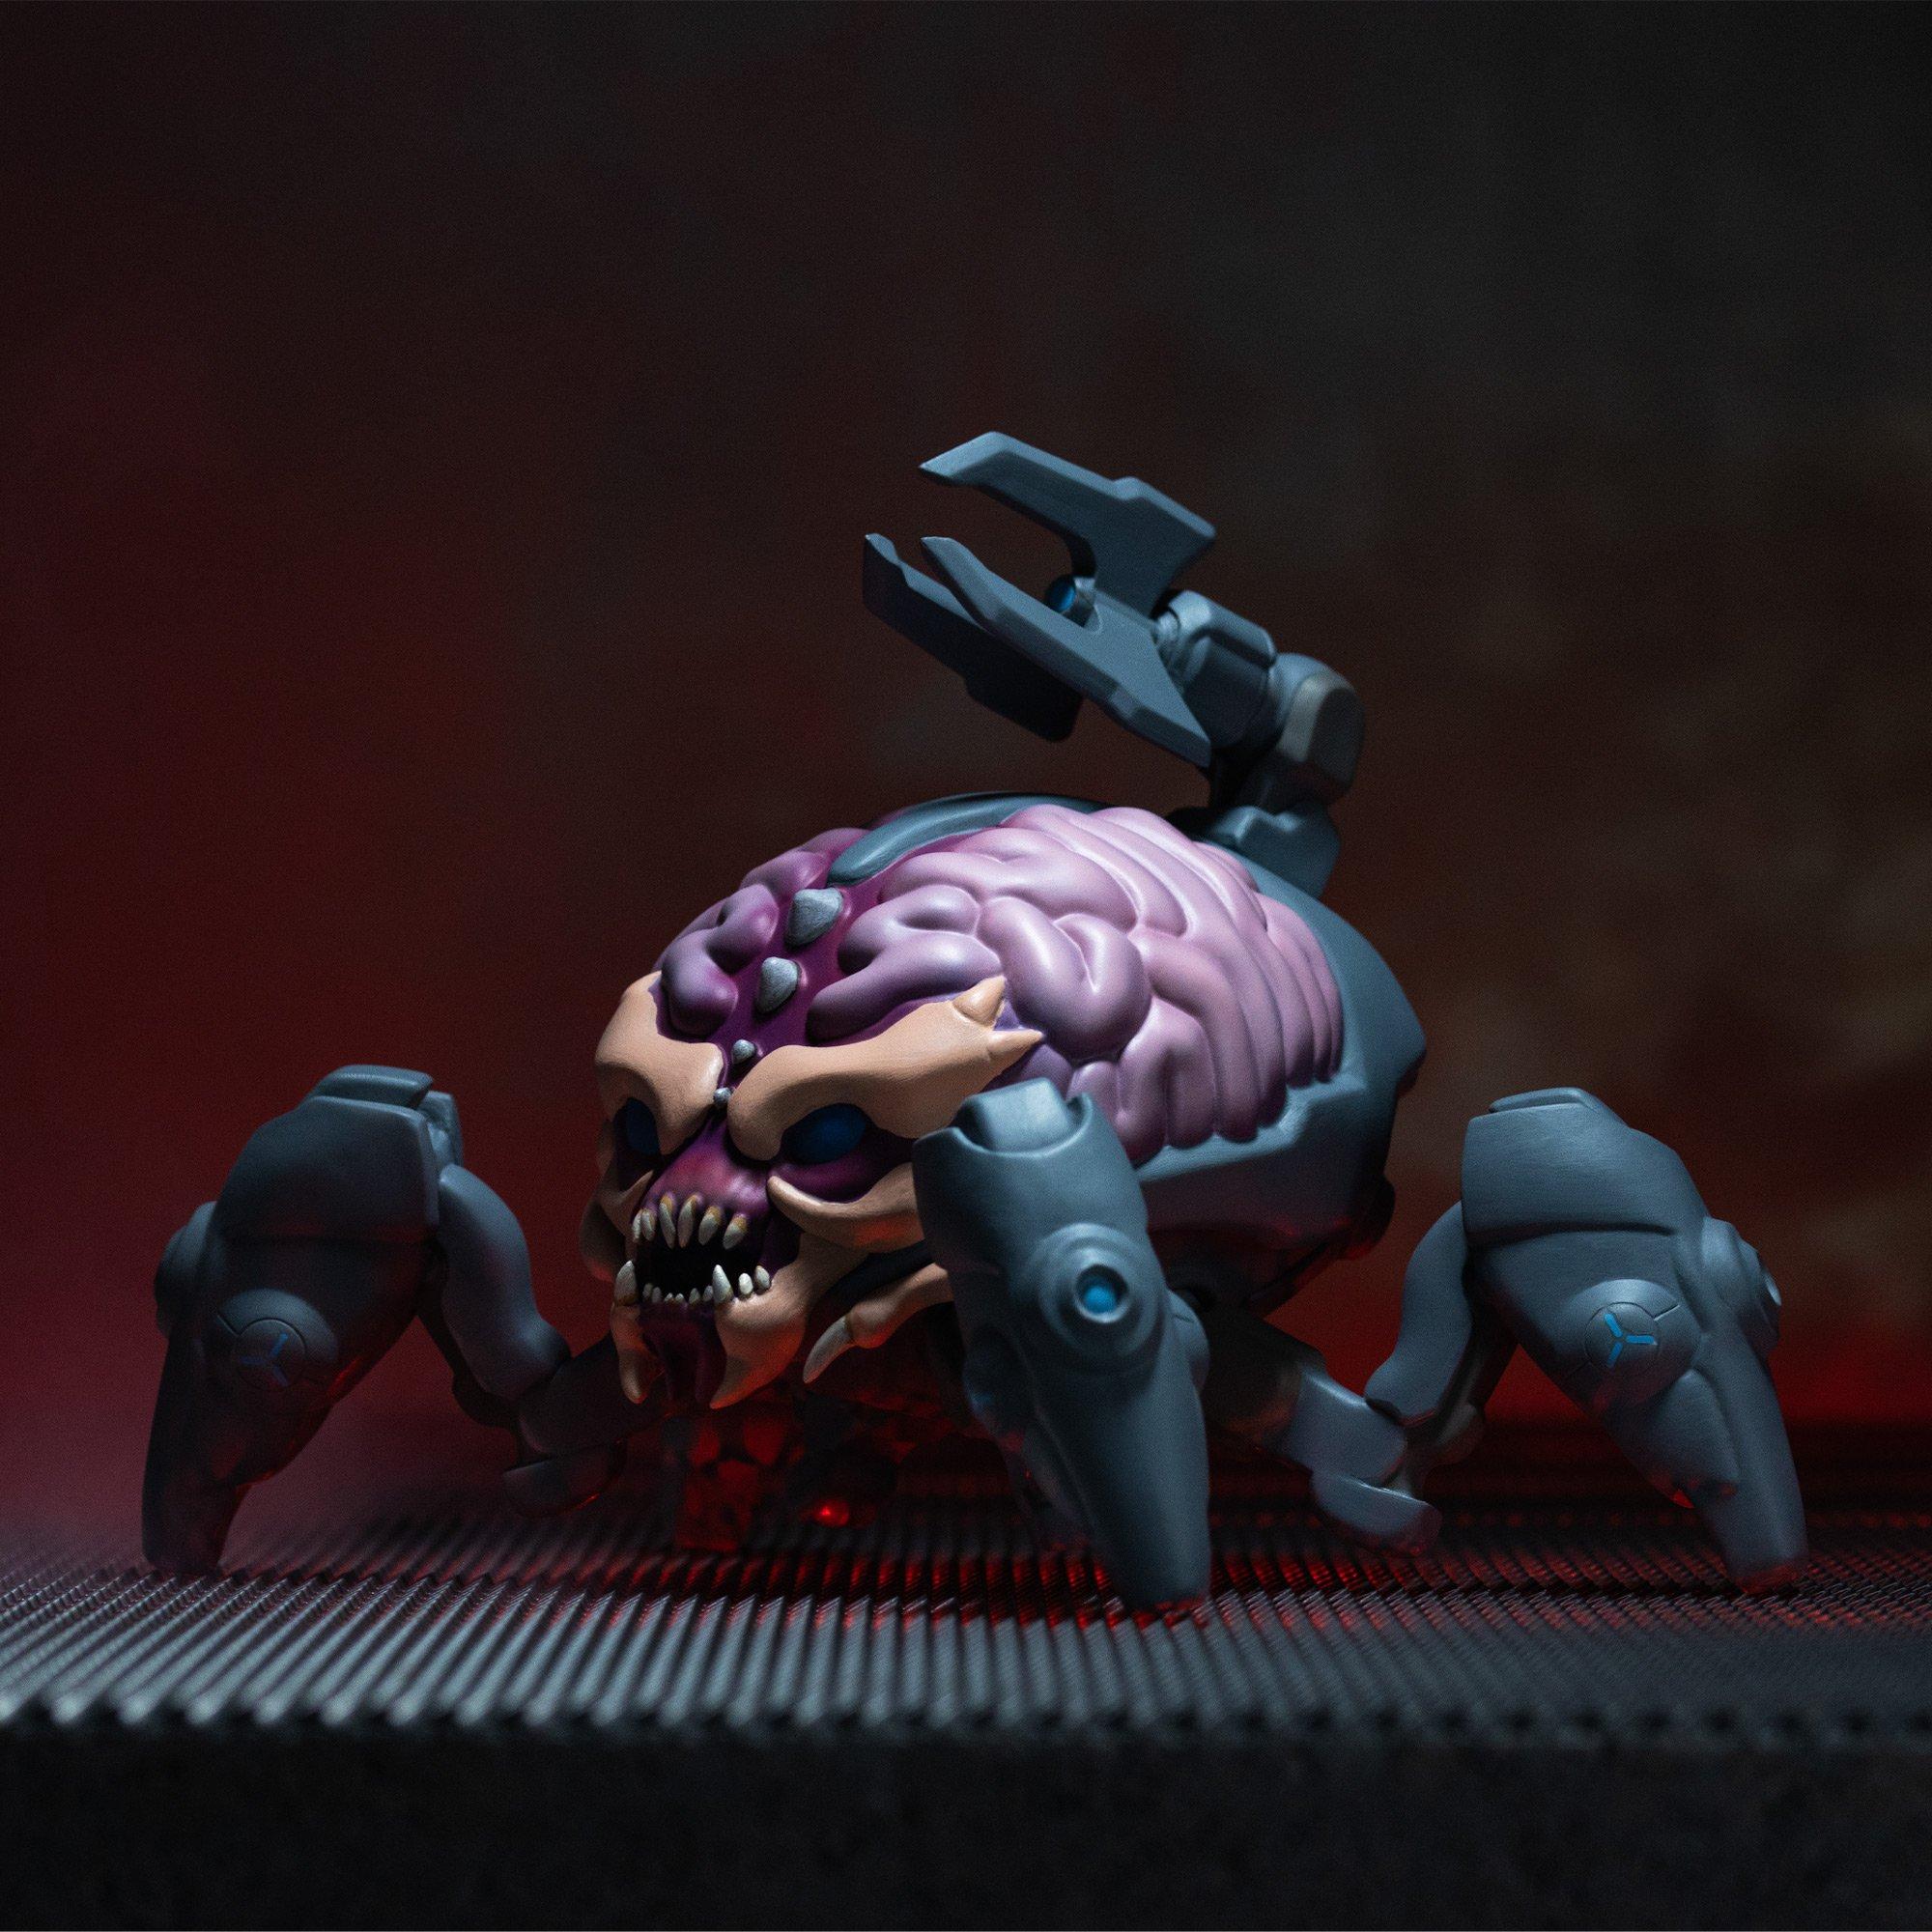 Numskull Arachnotron DOOM Eternal In-Game Collectable Replica Toy Figure Limited Edition Official DOOM Merchandise 